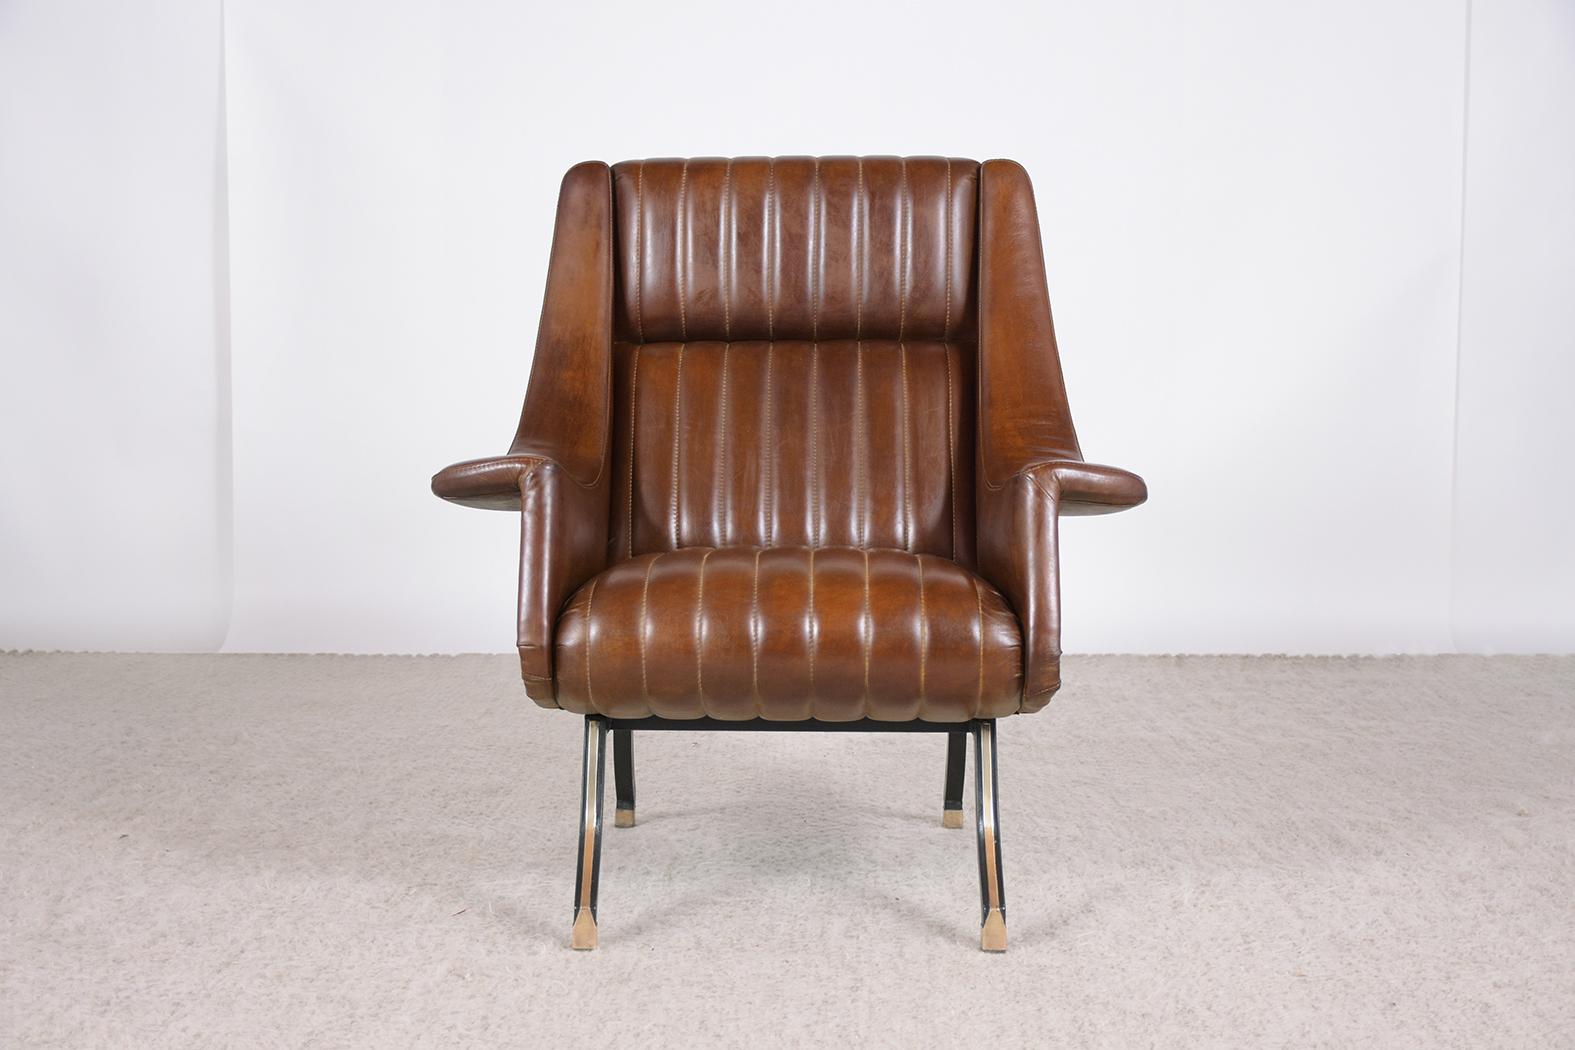 Hand-Crafted Pair of Vintage Mid-Century Modern Leather Lounge Chairs